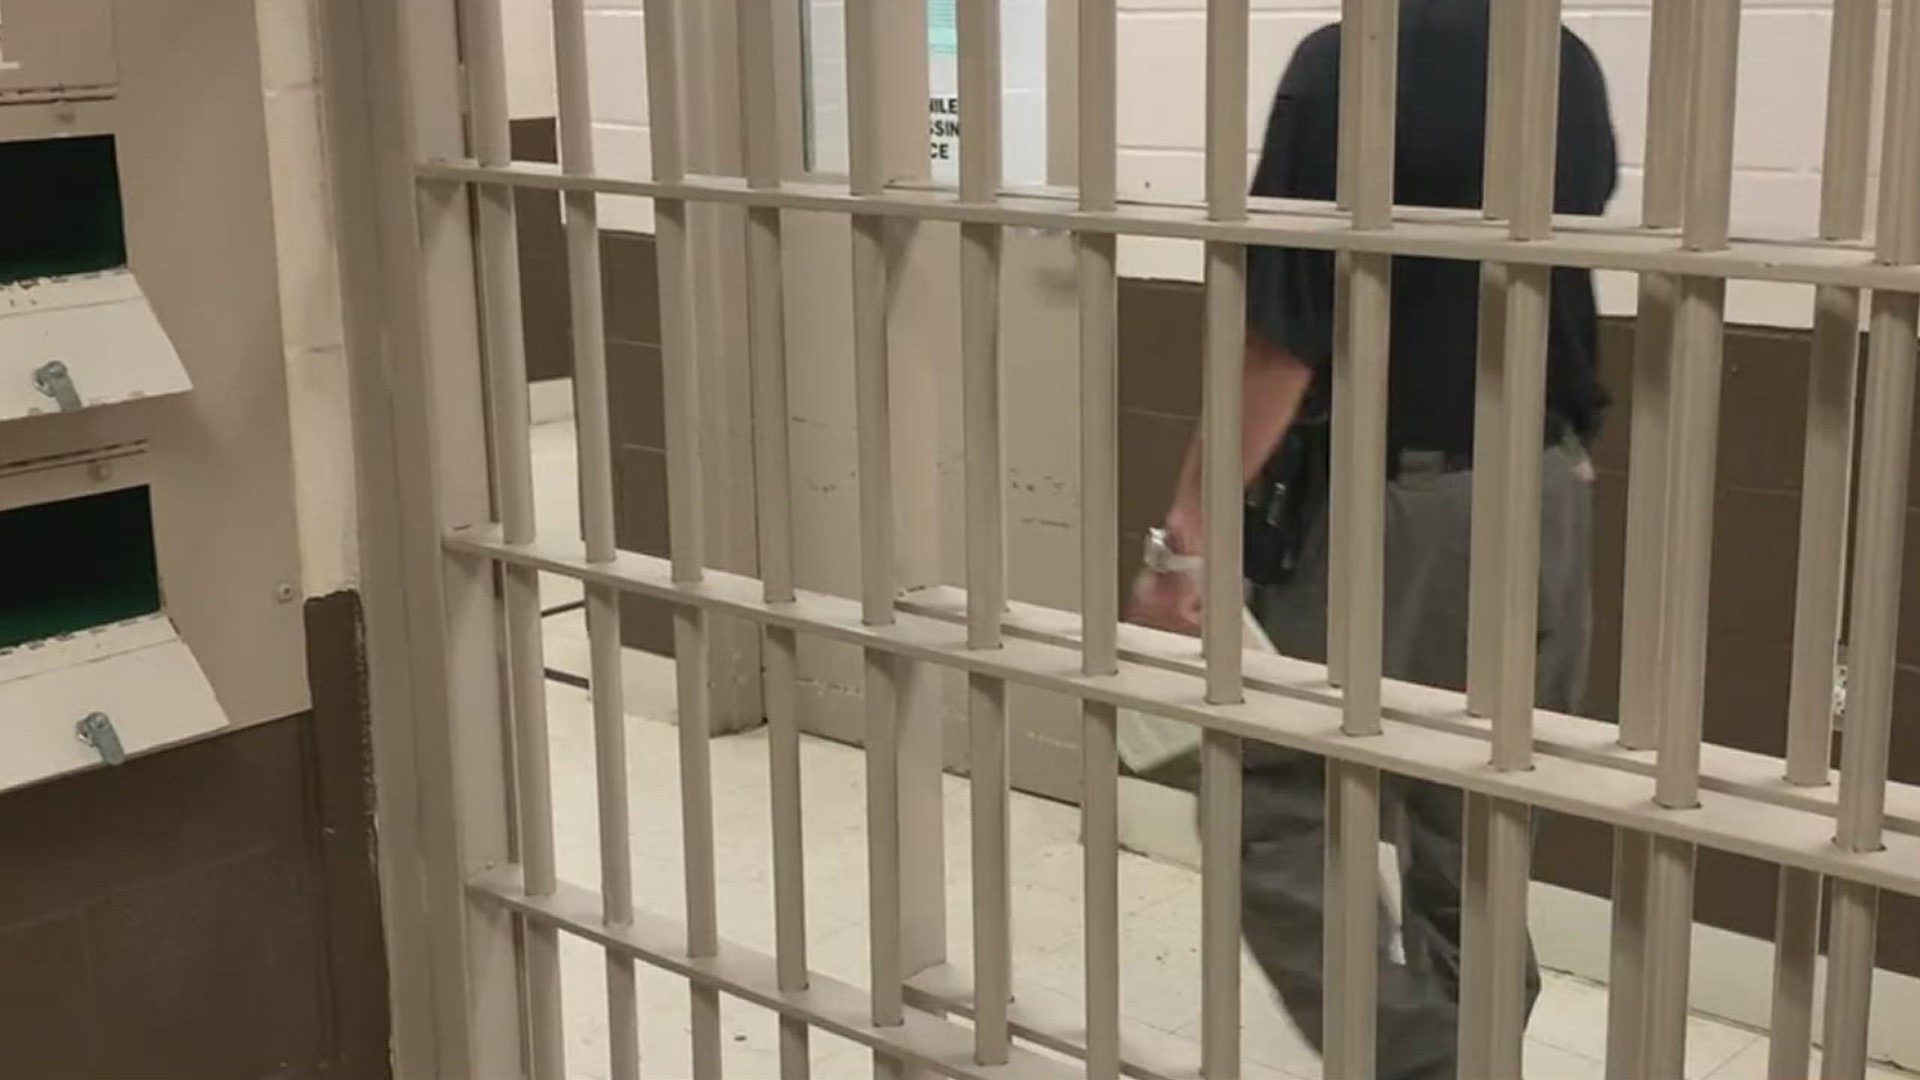 Kleberg County Sheriff Richard Kirkpatrick said the jail is currently operating at 100 percent capacity when it comes to employees.